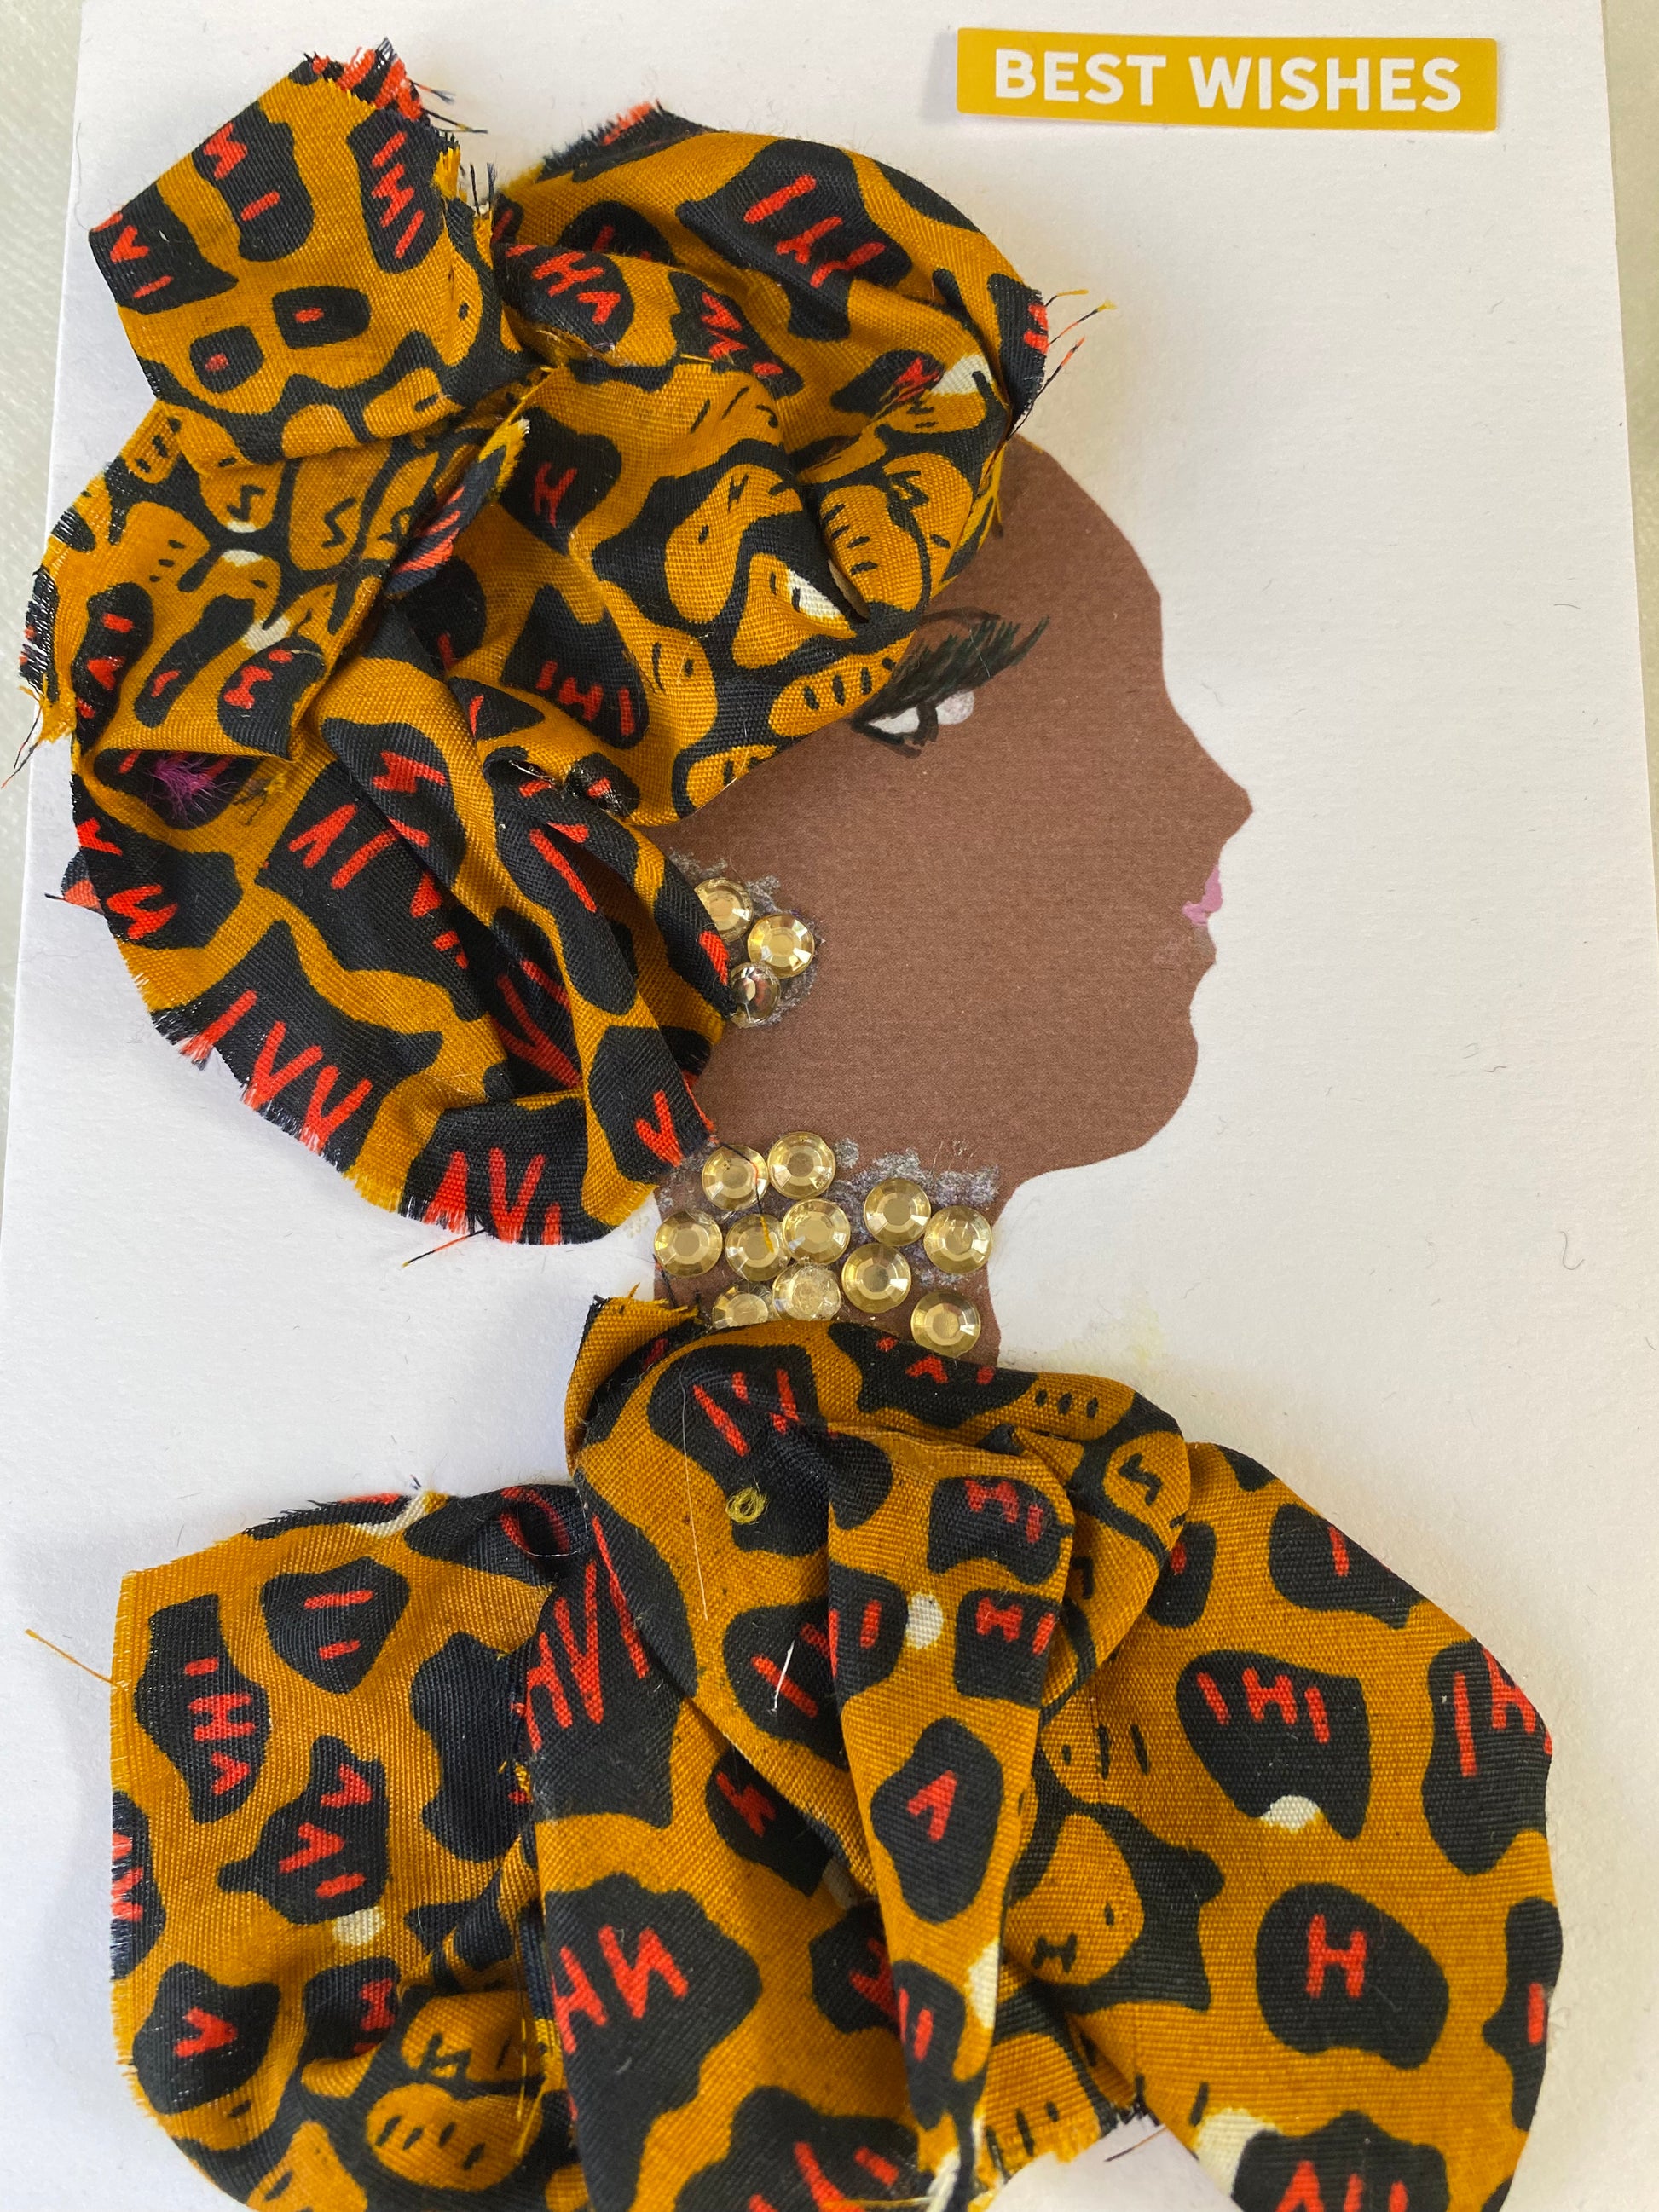 I designed this card of a woman named Chesham Chilly. She has a brown skin tone and wears a lovely patterned headwrap. She wears a gorgeous matching pattern blouse. She wears dazzling gold jewellery. In the corner it says "Best Wishes"